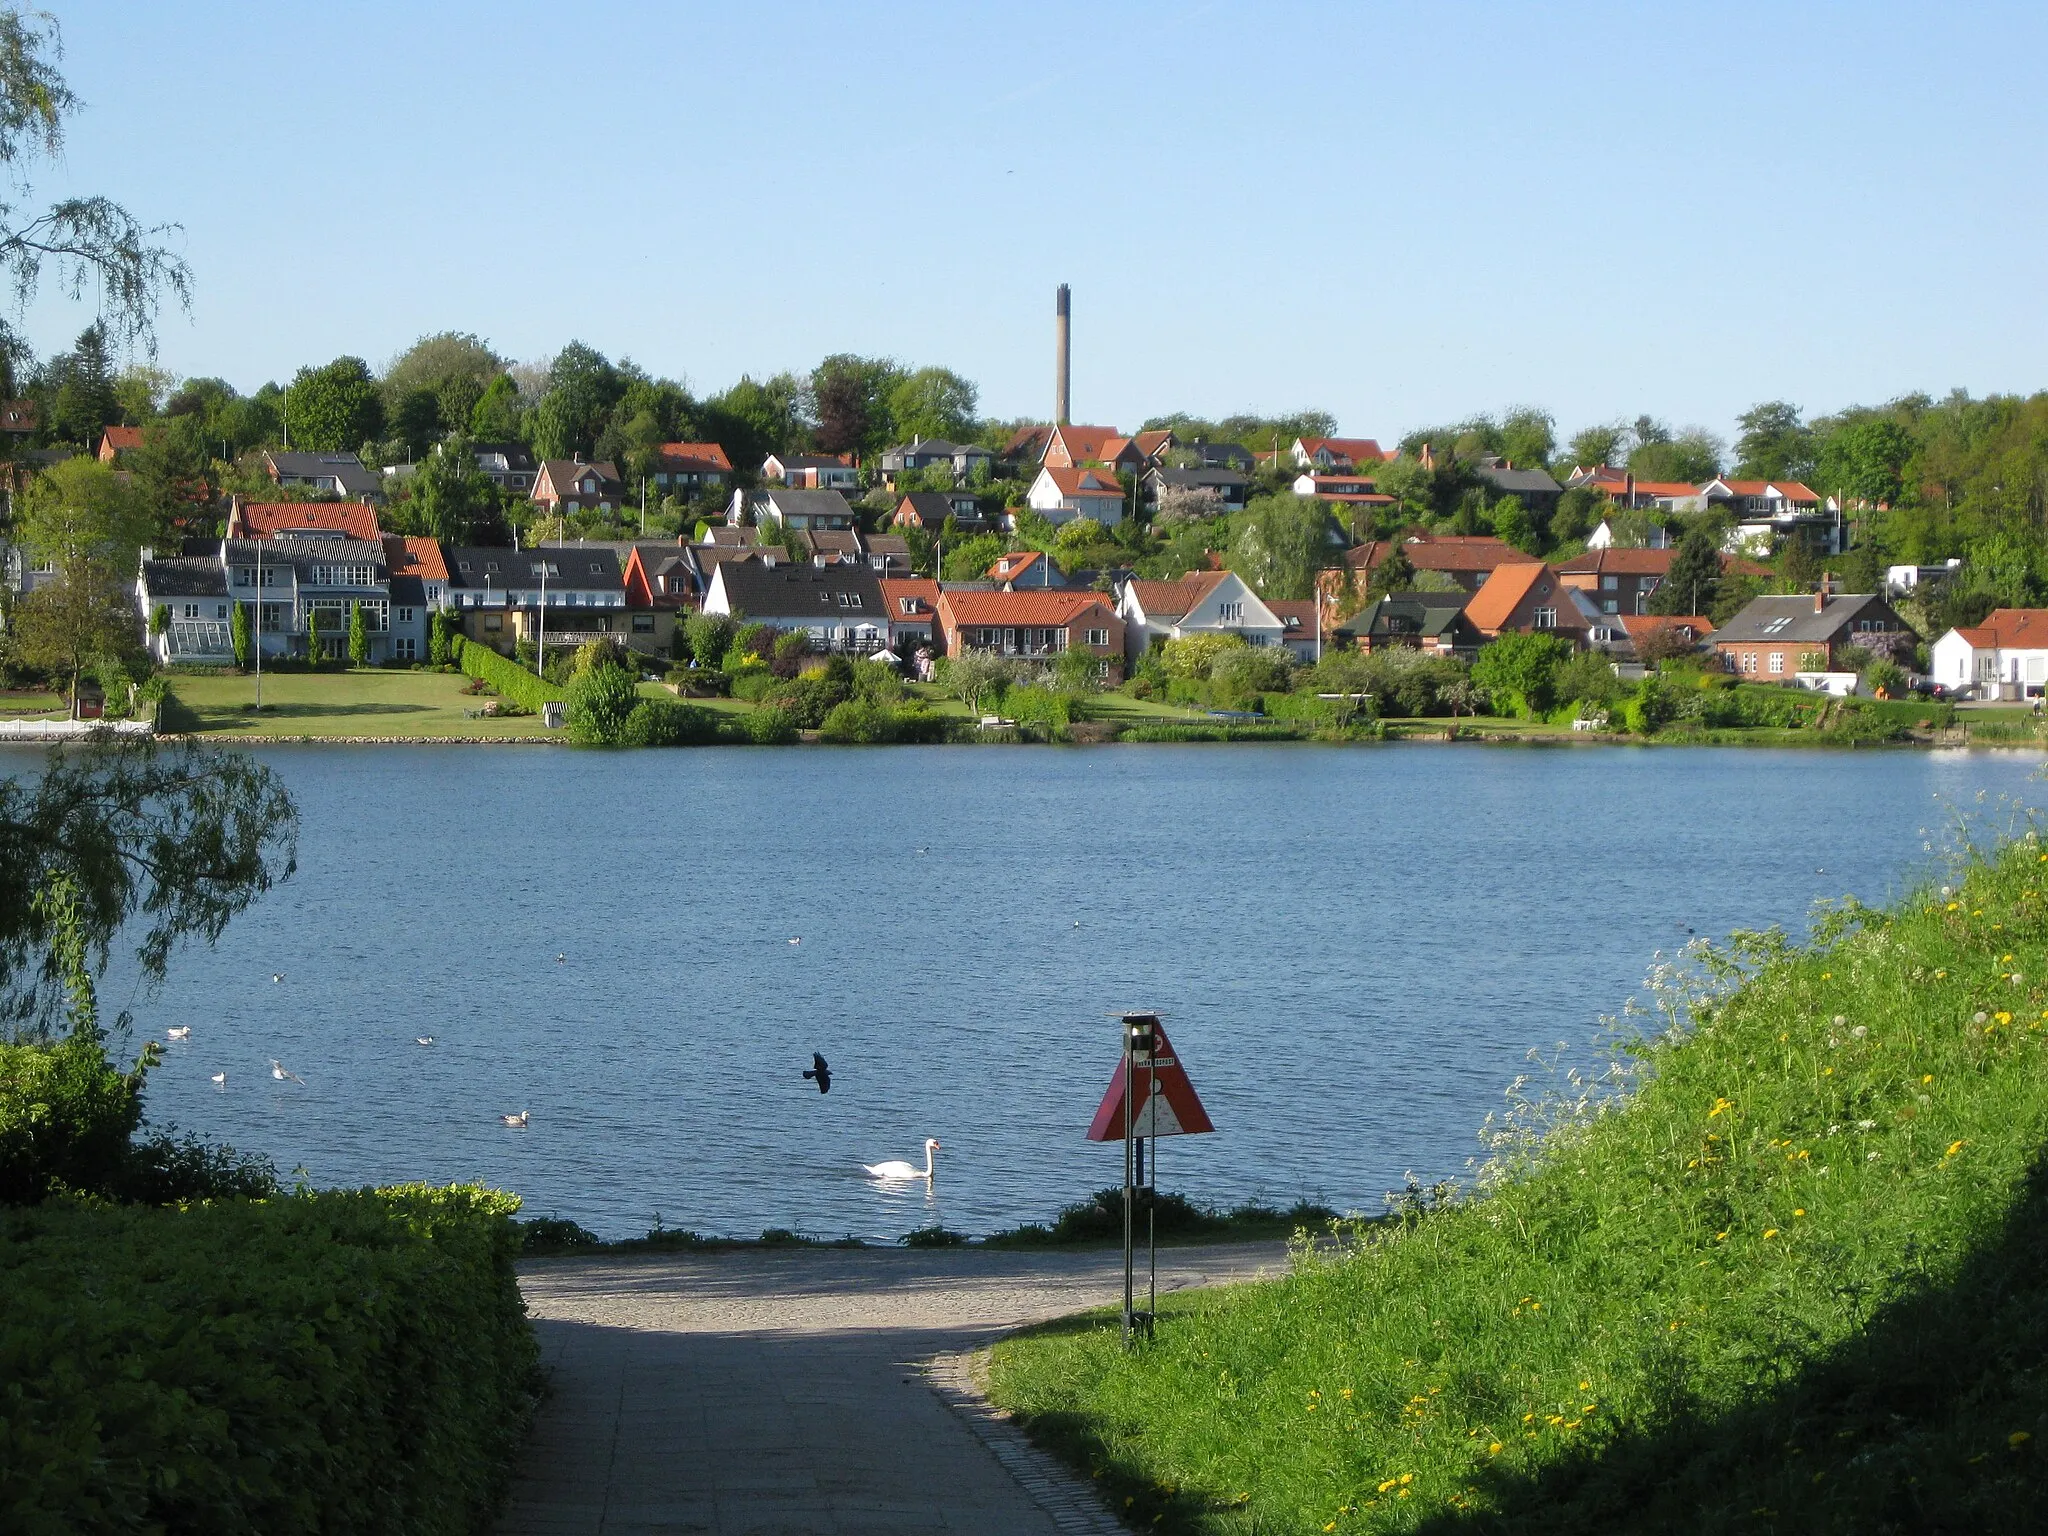 Photo showing: The castle lake "Kolding Slotsø" in the city of "Kolding". The city is located in South-Central Jutland, Denmark.